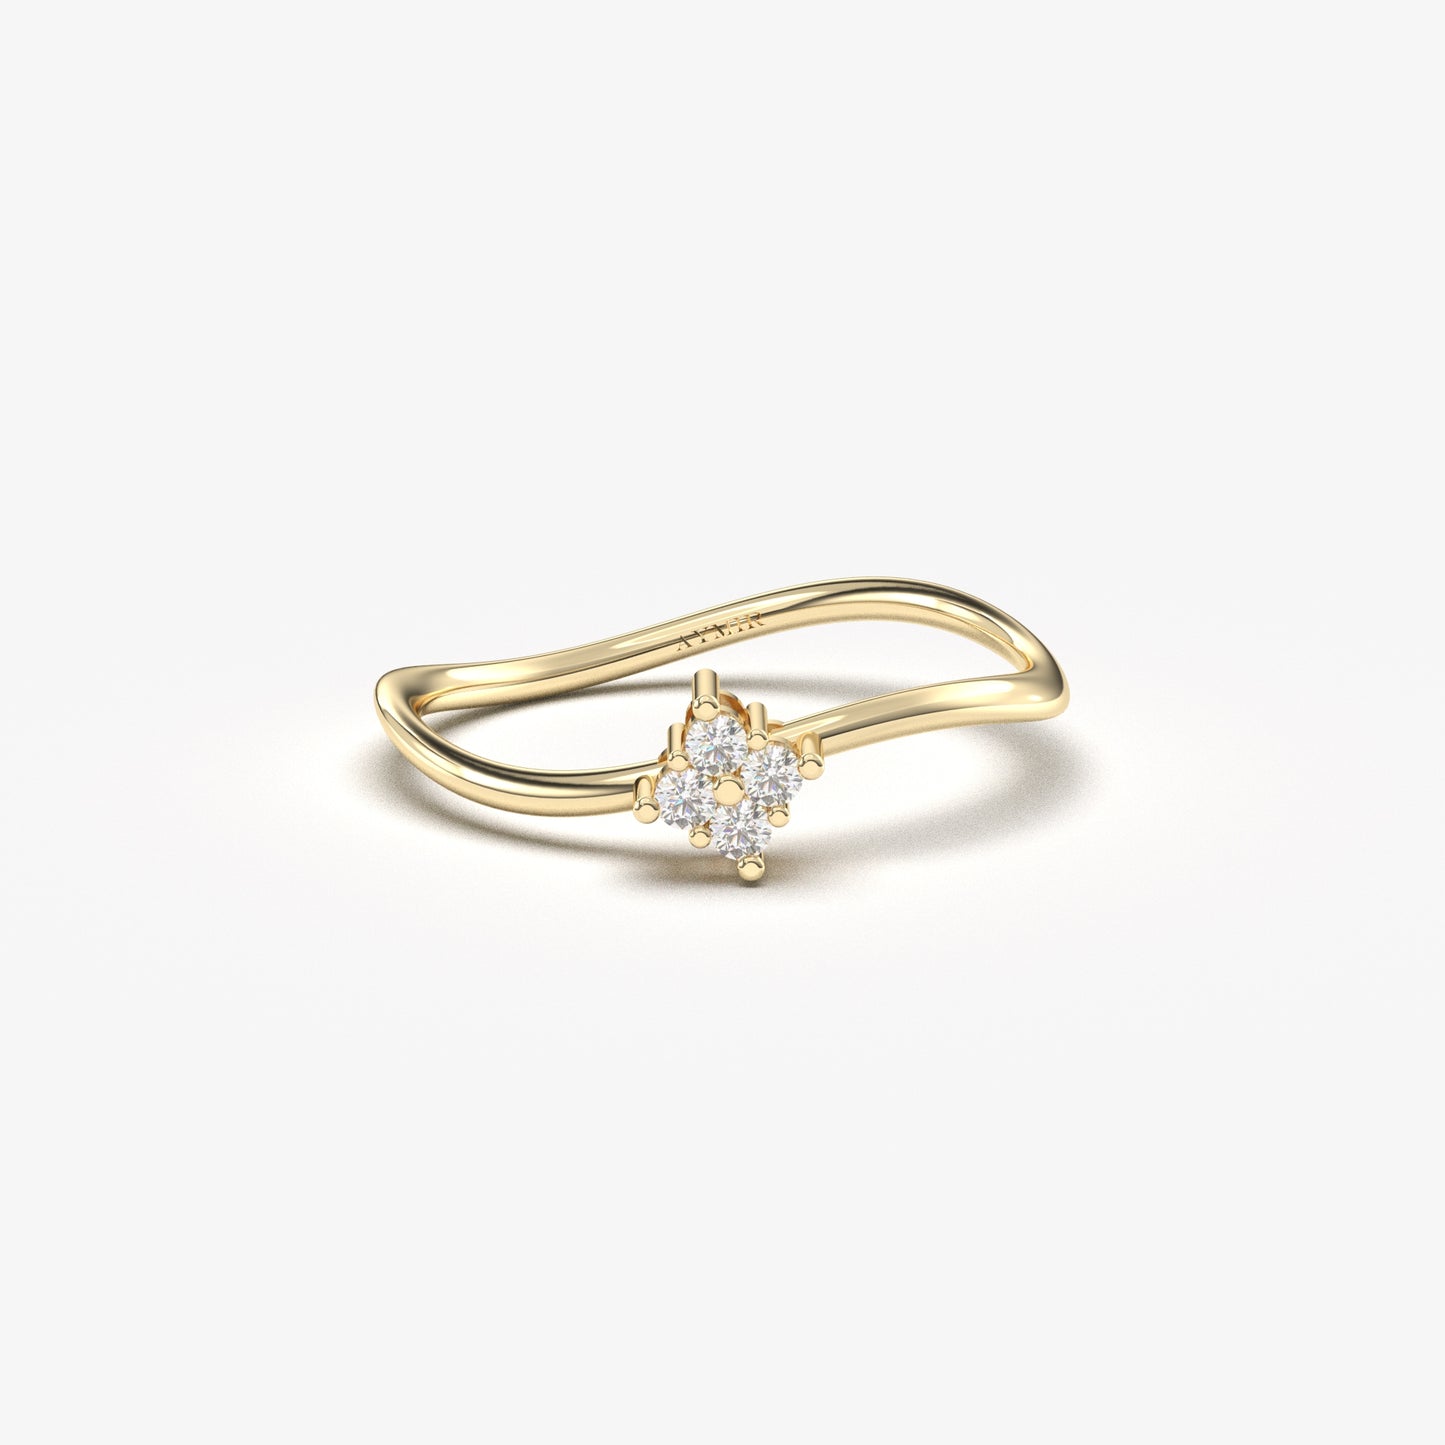 10K Gold Curved Seed Ring - 2S187